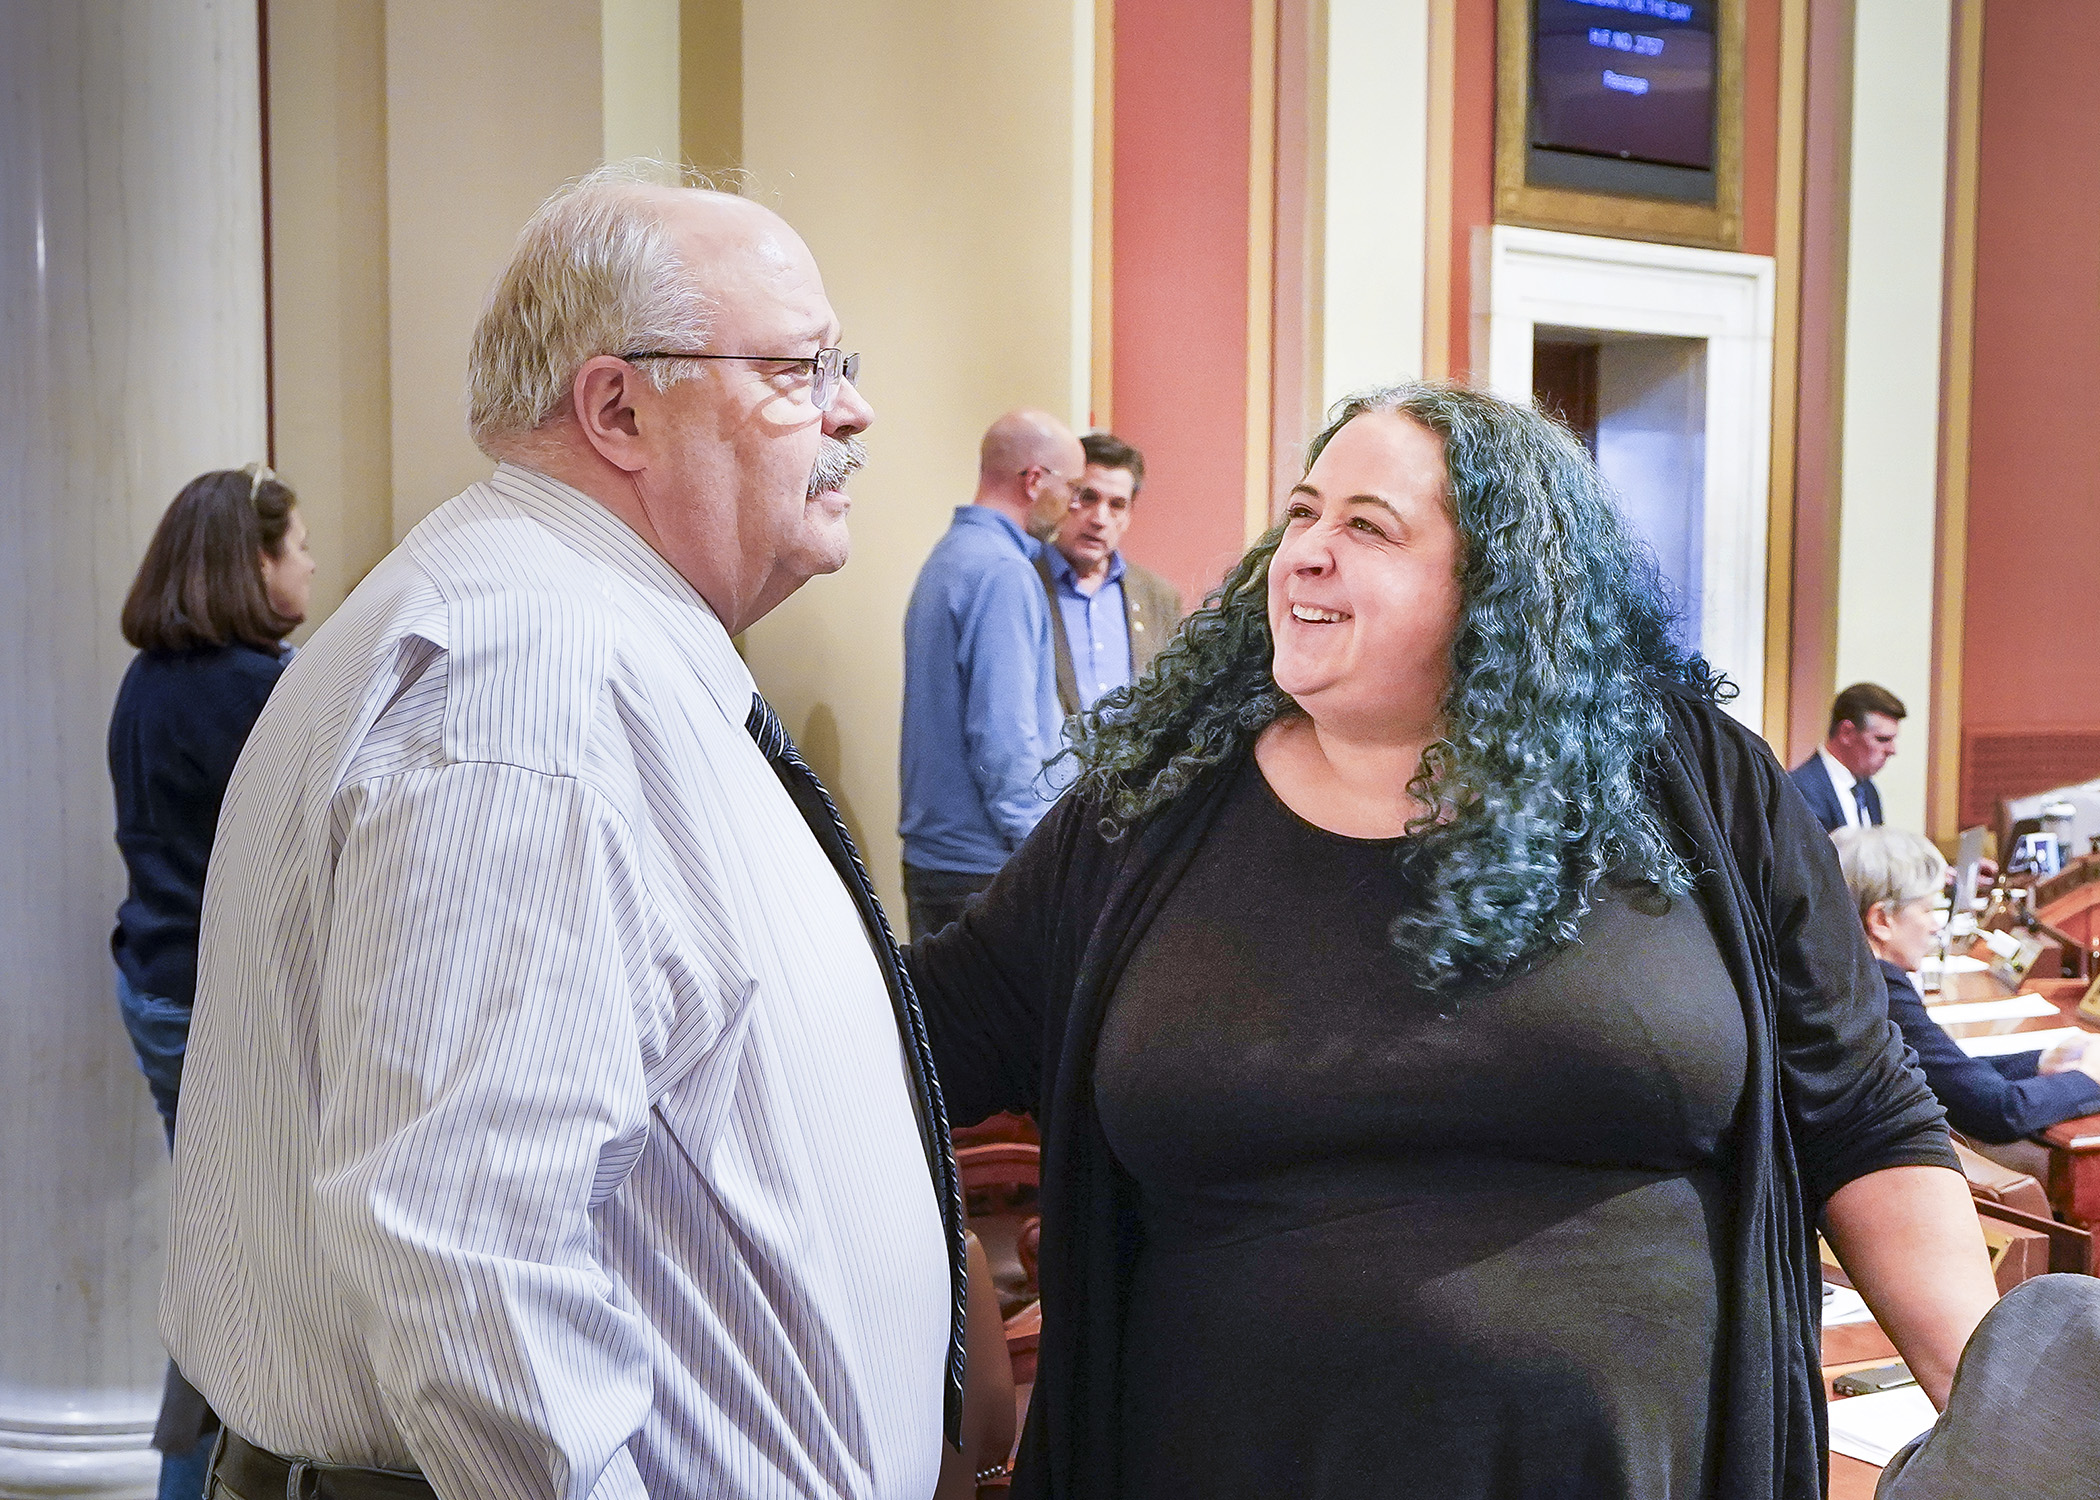 Rep. Greg Davids greets Rep. Aisha Gomez, who chairs the House Taxes Committee, following a 128-2 floor vote on a bill that would adjust individual income tax standard deduction amounts for tax year 2023. (Photo by Andrew VonBank)